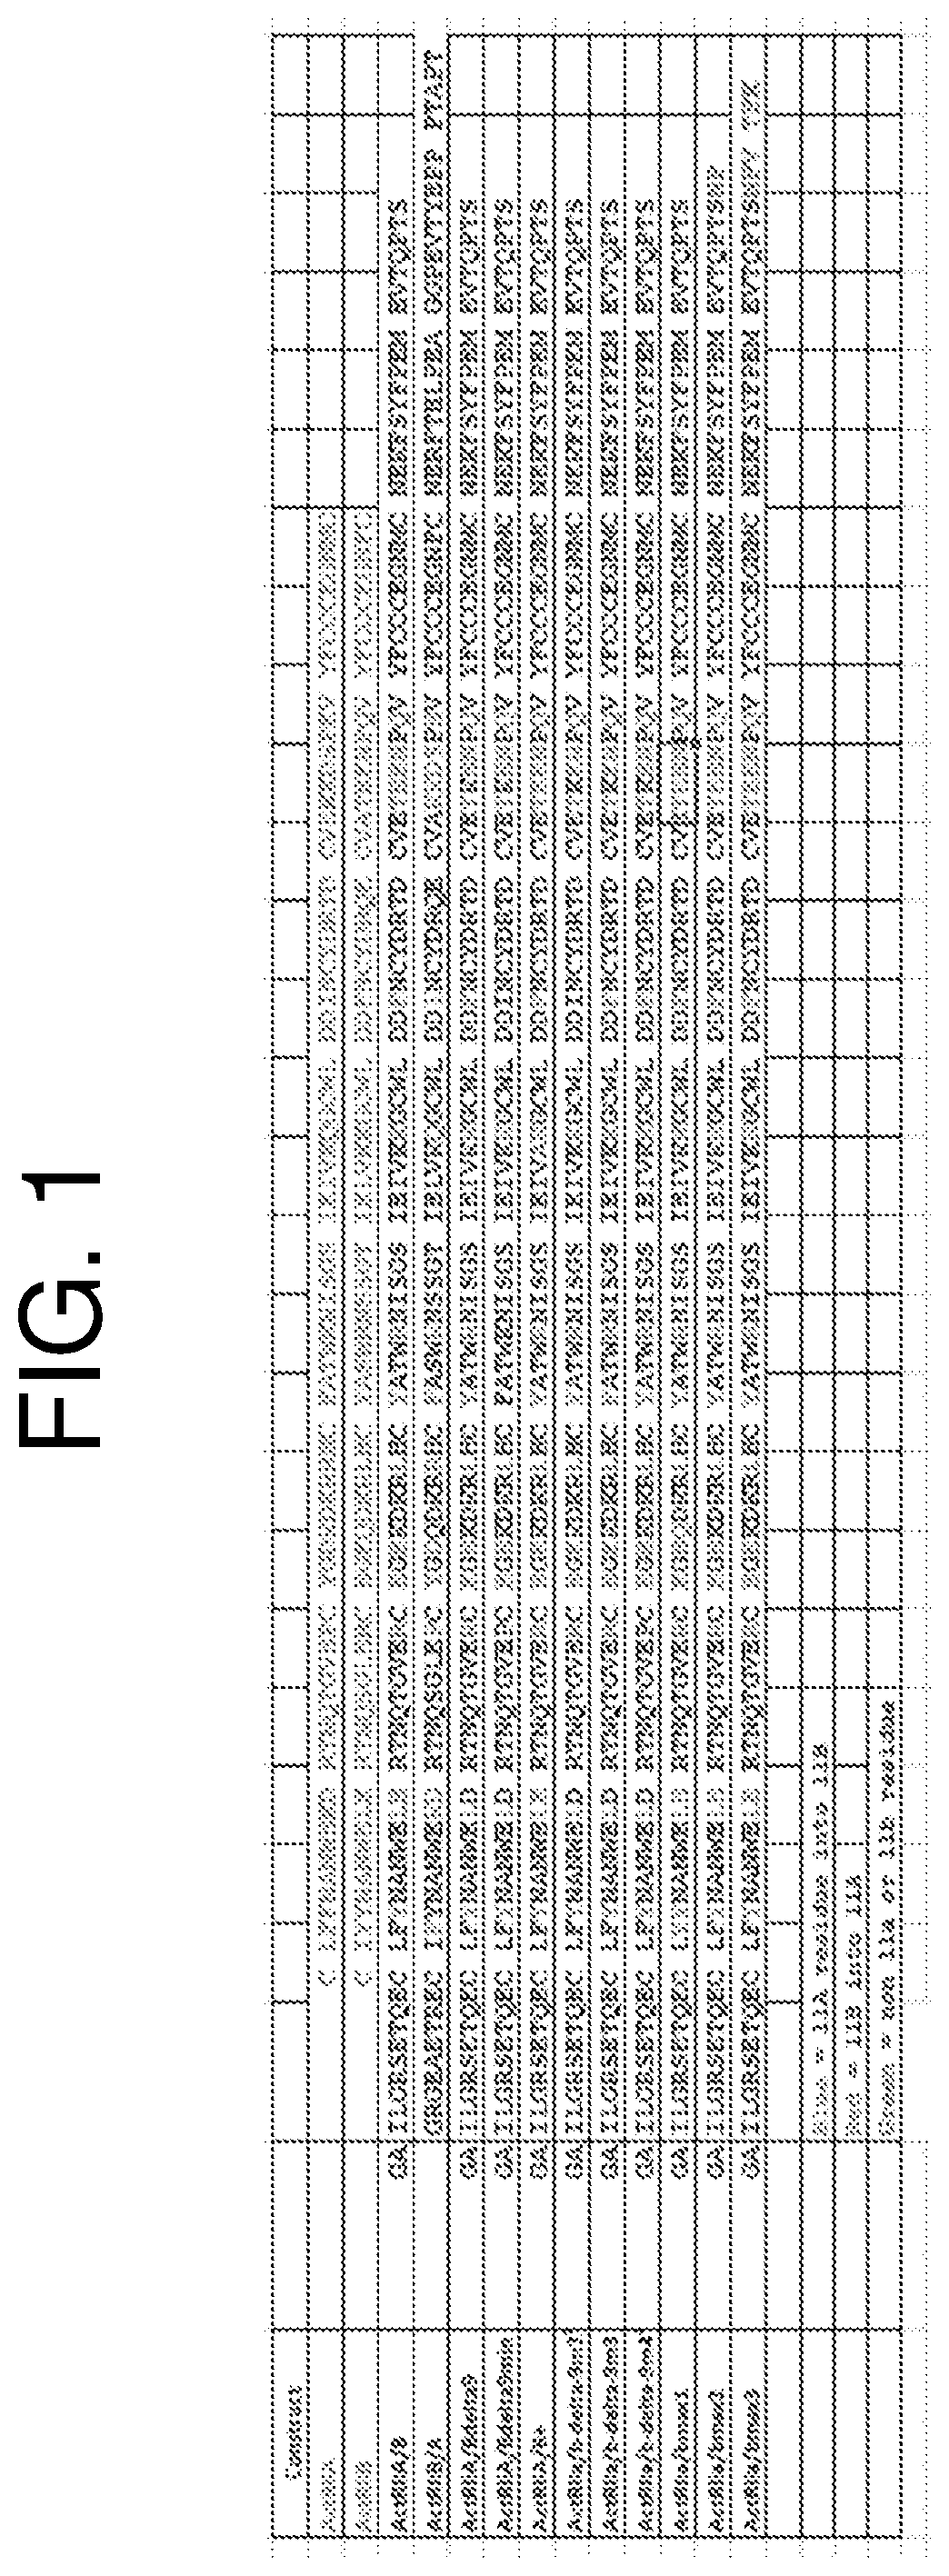 Activin receptor type iia variants and methods of use thereof